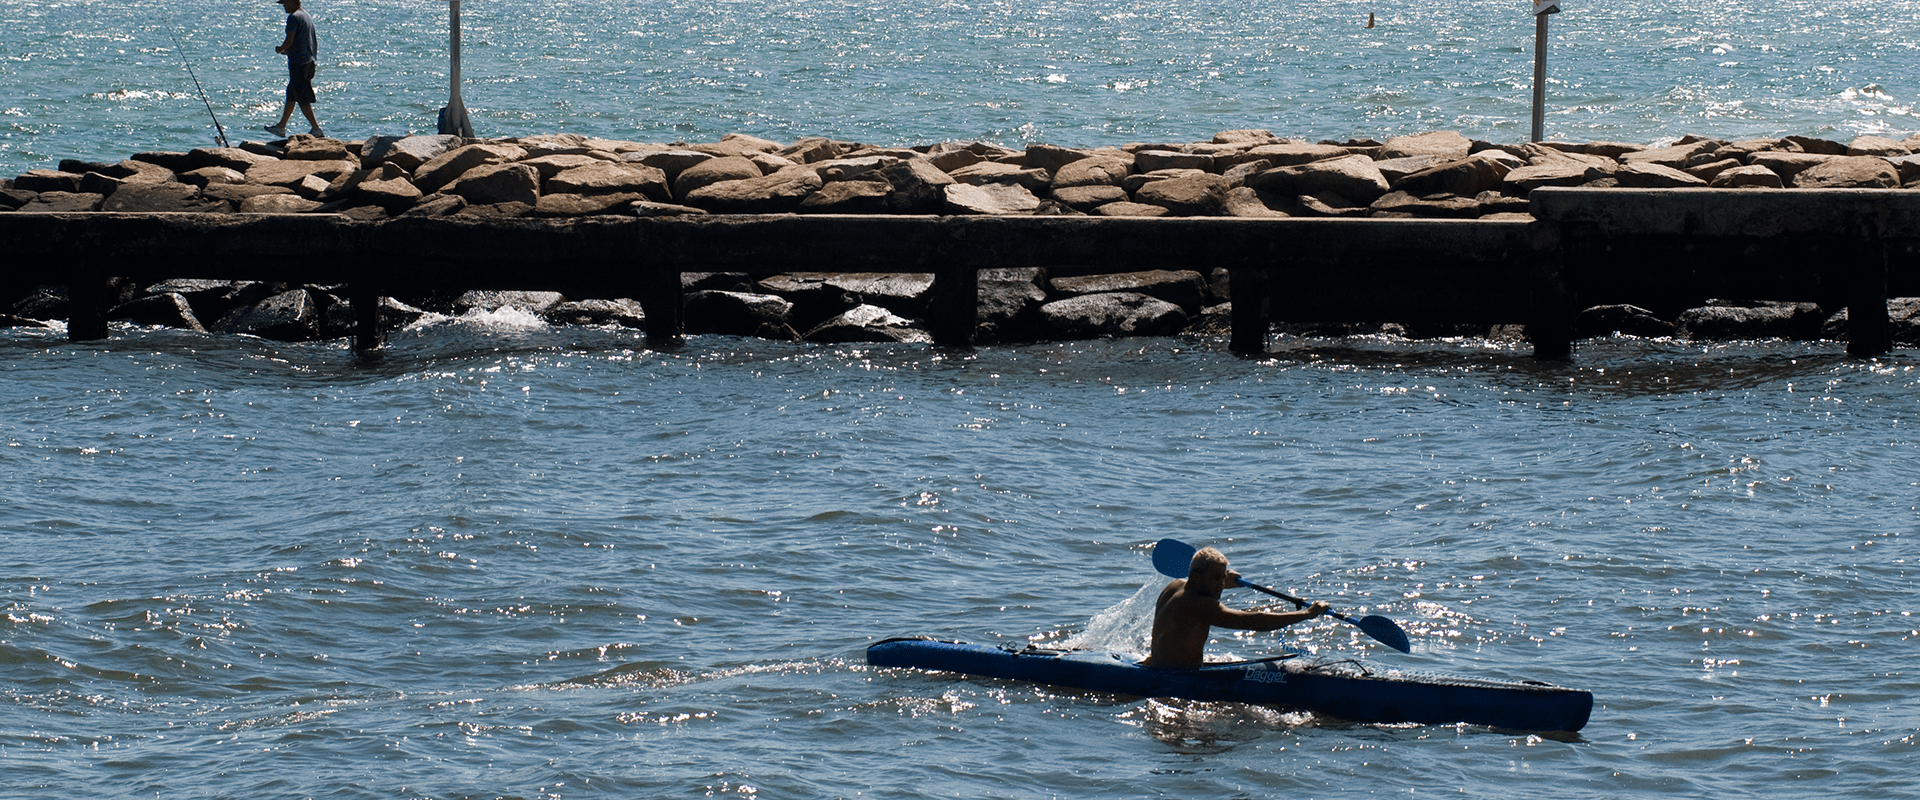 A sunny day at the mouth of the river with the bay in the background. A person is enjoying time in a kayak and another person is fishing off the breakwater.